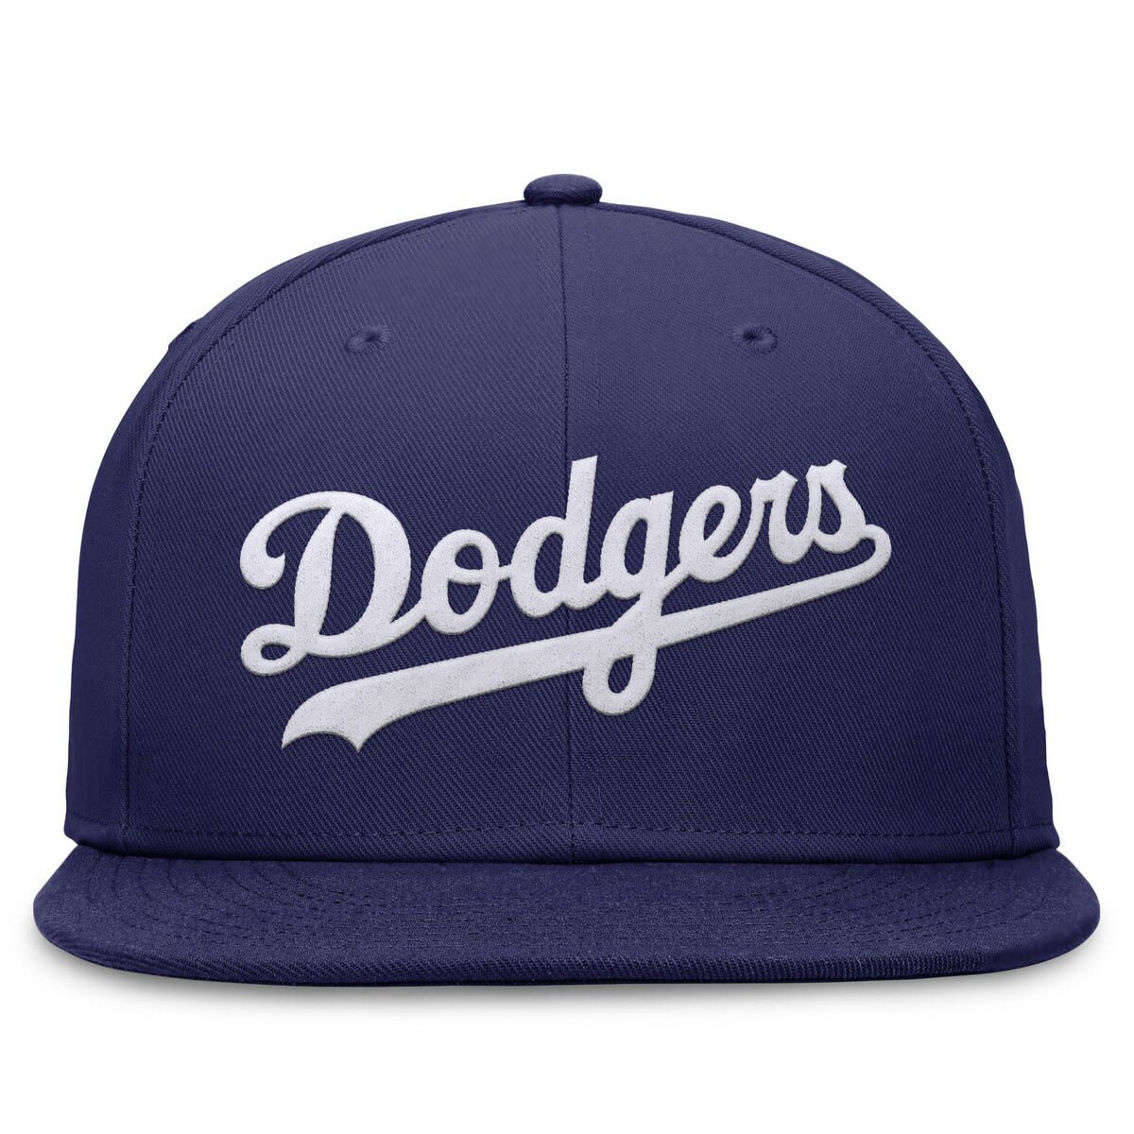 Nike Men's Royal Los Angeles Dodgers Evergreen Performance Fitted Hat - Image 3 of 4